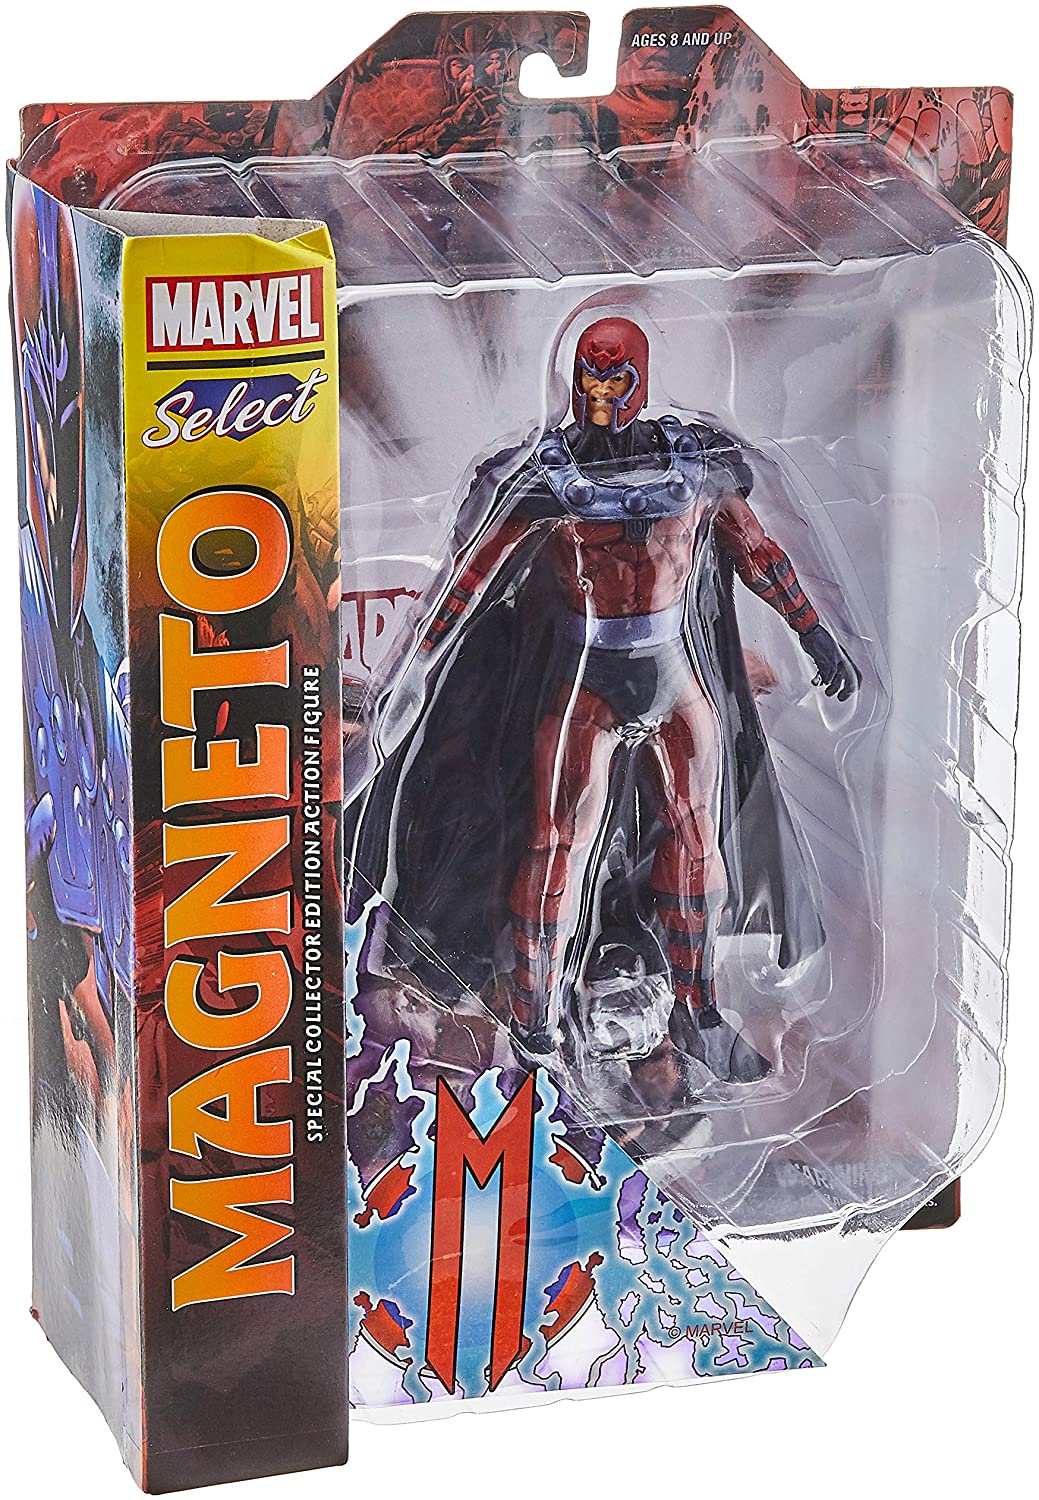 Marvel Select - Magneto Special Collectors Edition Action Figure